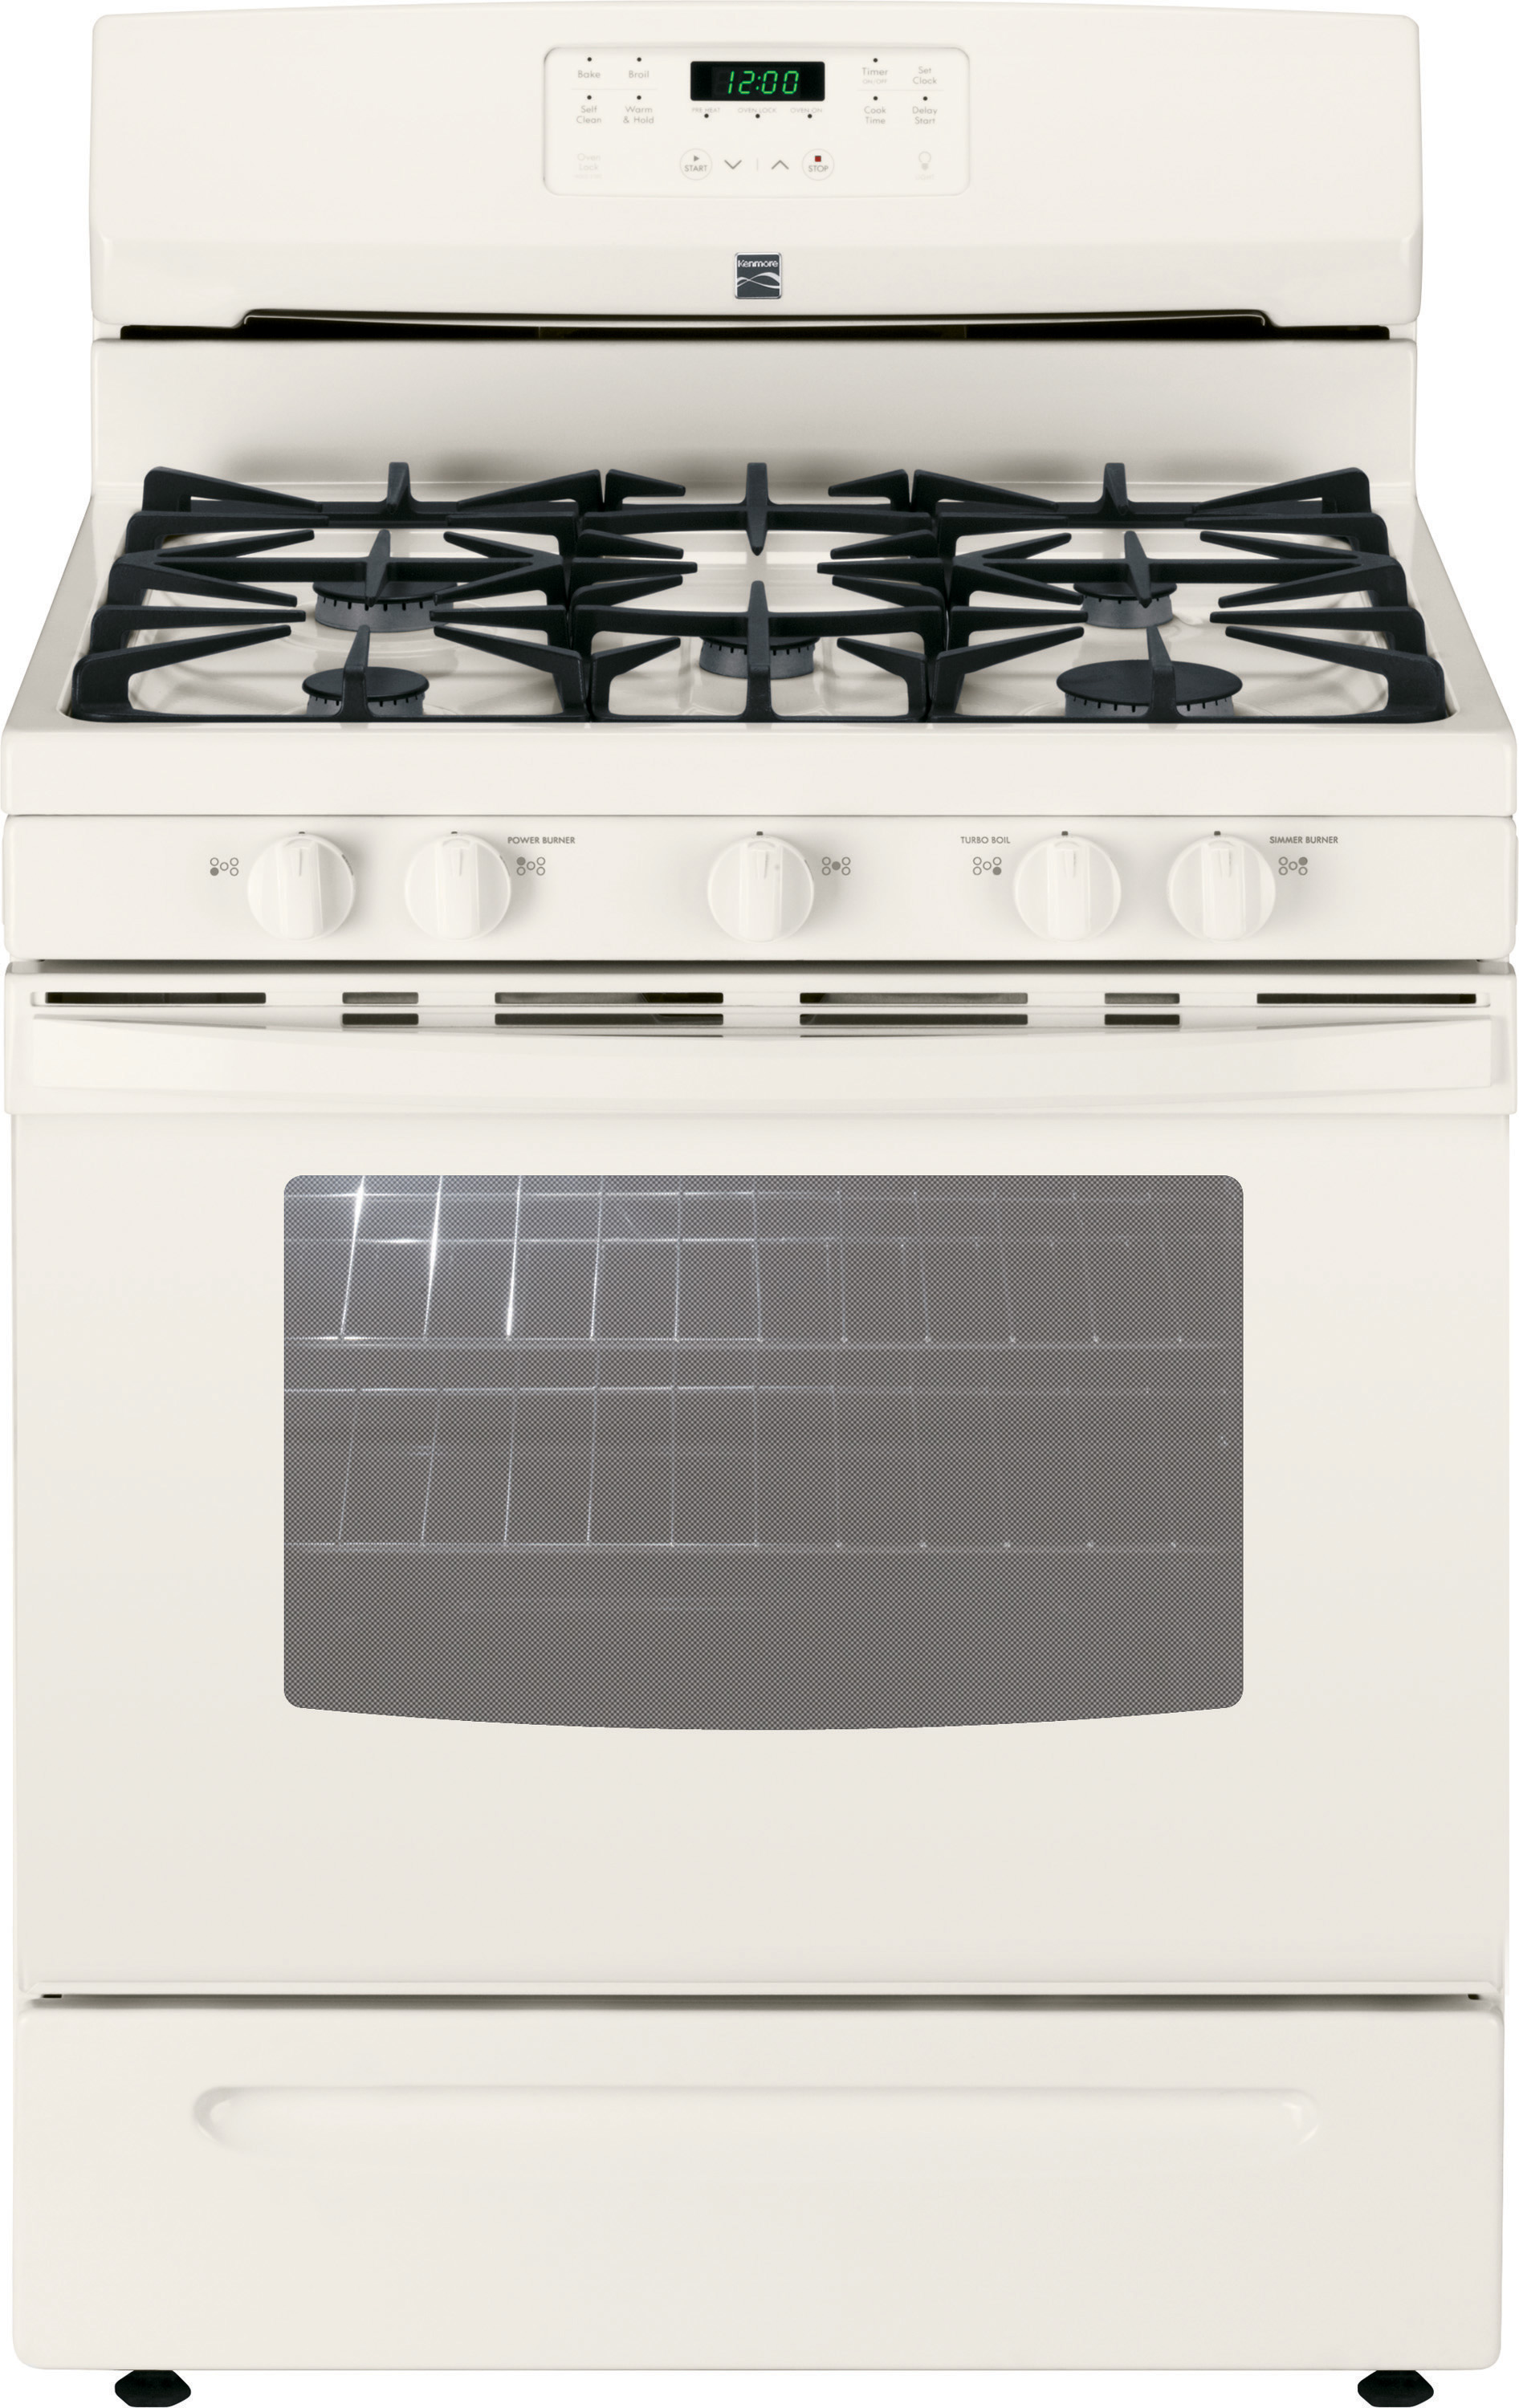 0012505508622 - 5.0 CU. FT. FREESTANDING GAS RANGE W/VARIABLE SELF-CLEAN - BISQUE